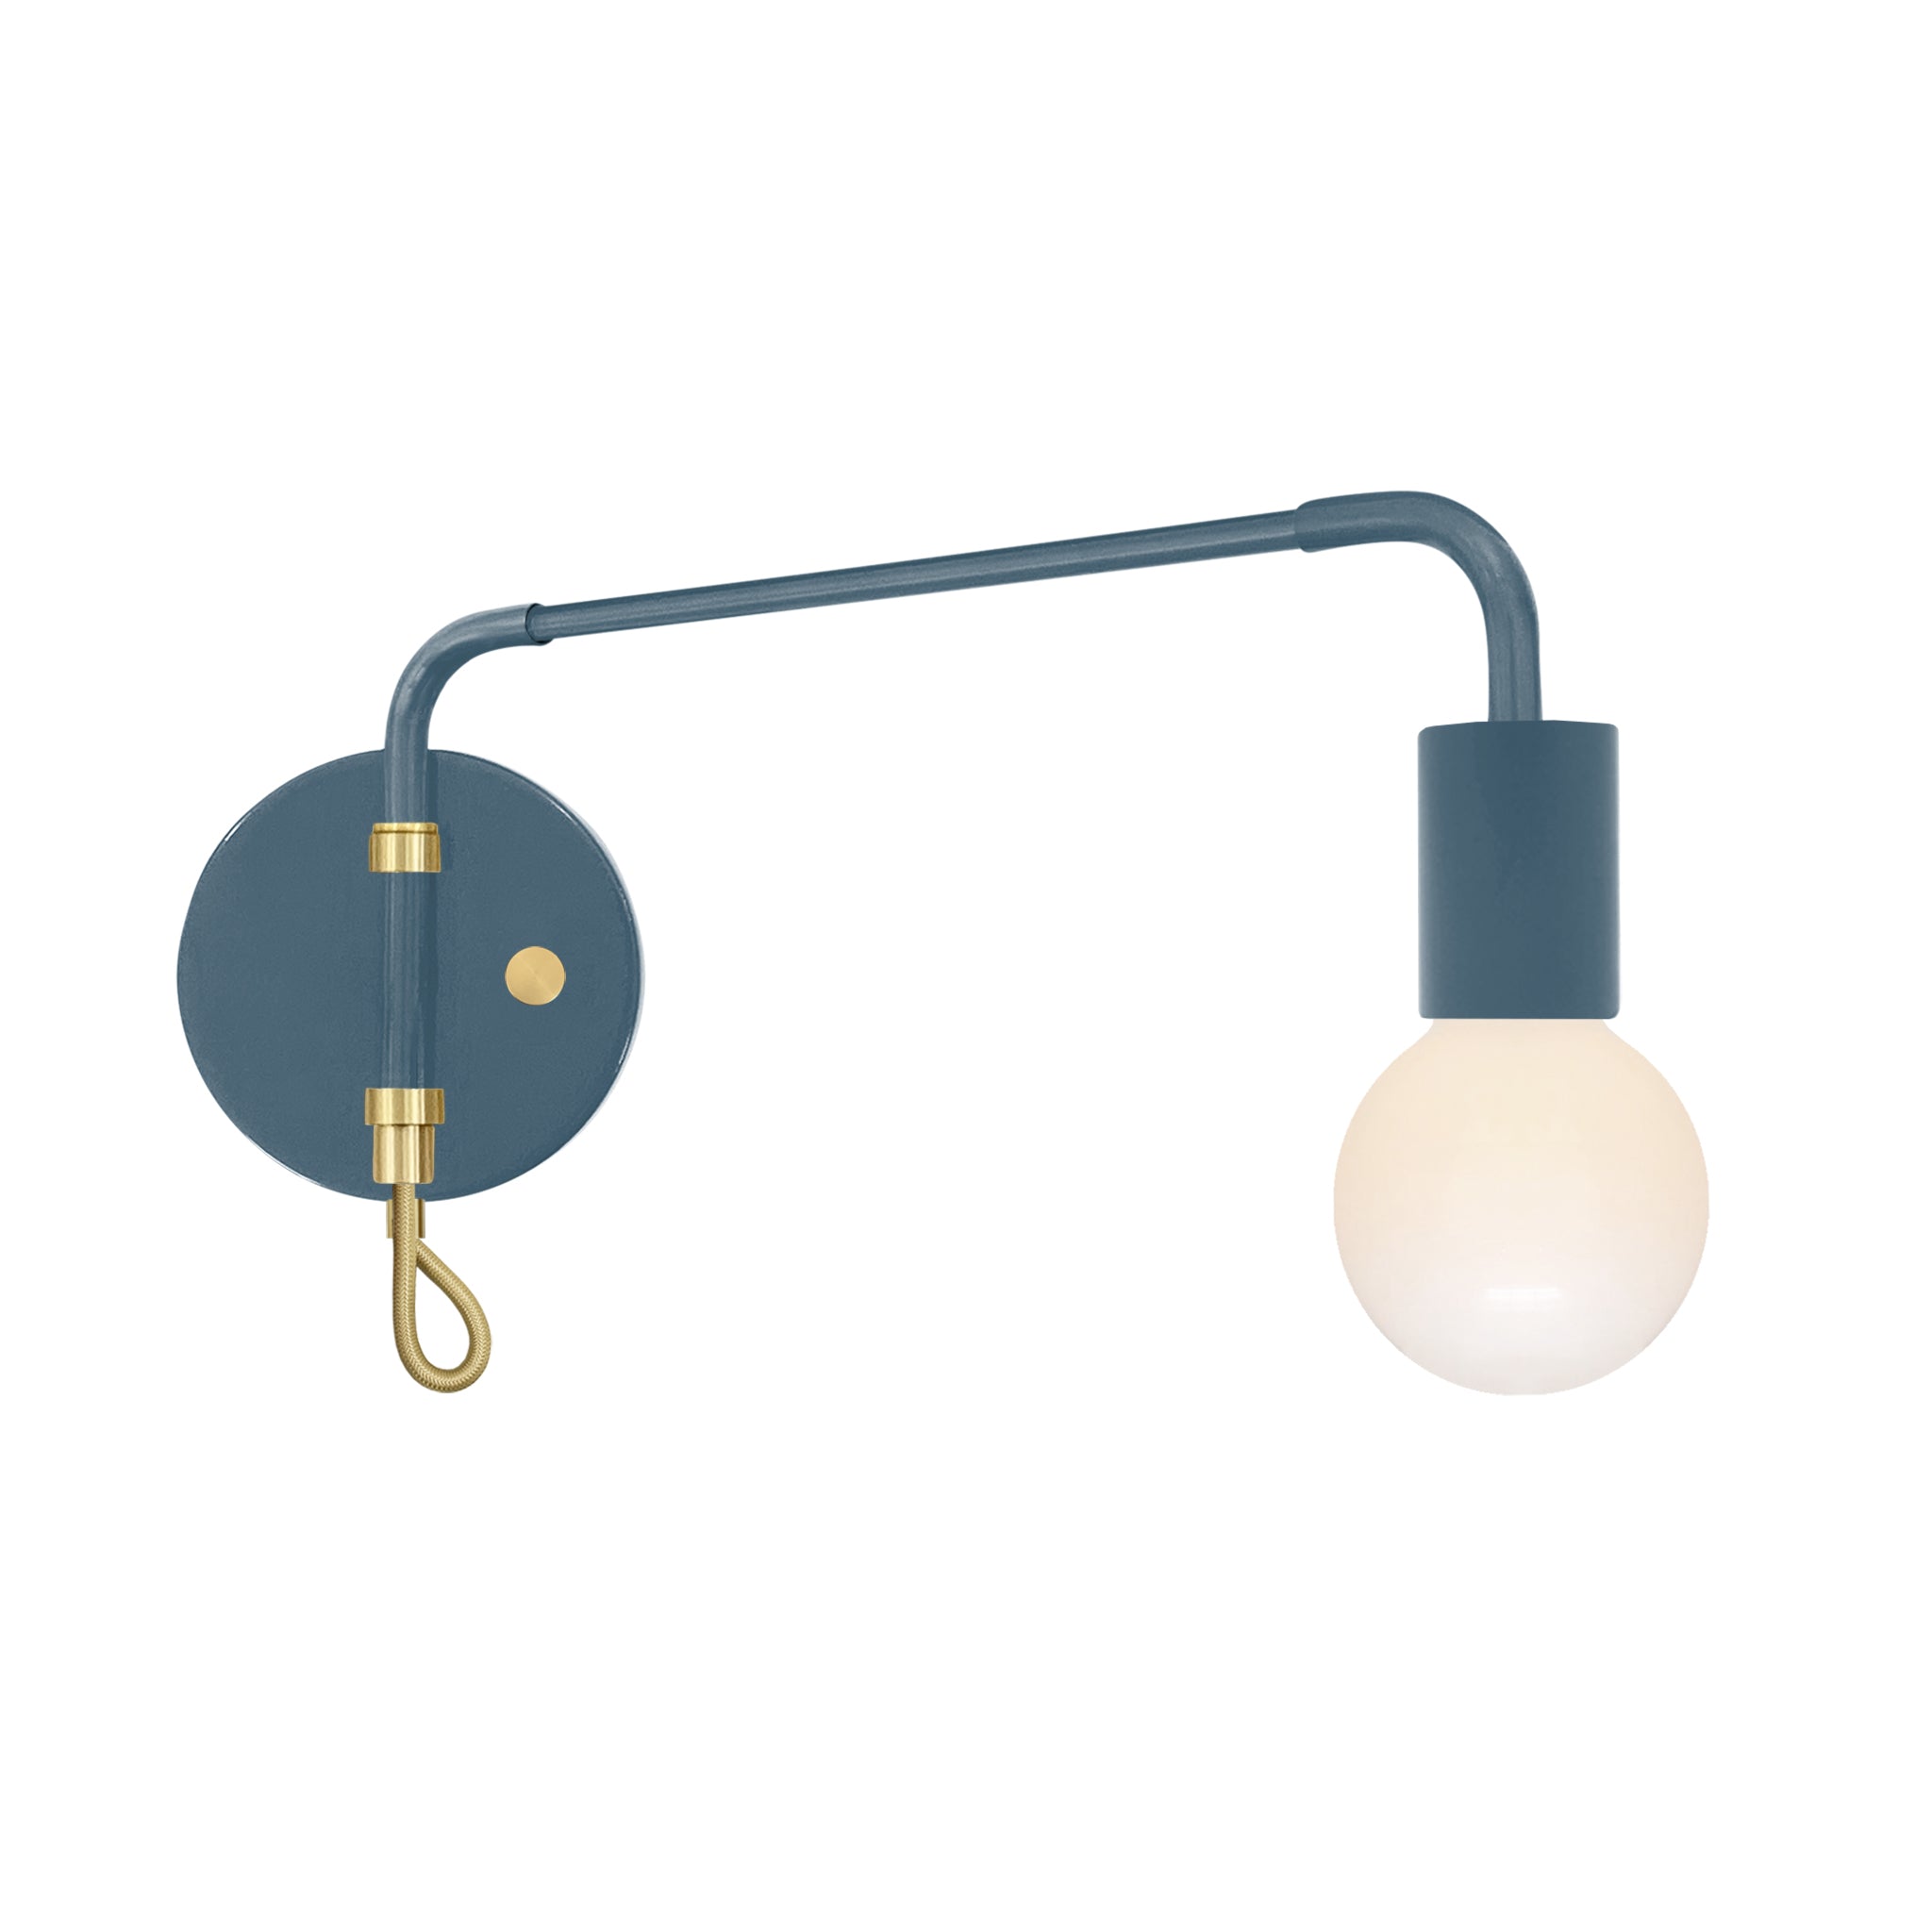 Brass and slate blue color Sway sconce Dutton Brown lighting